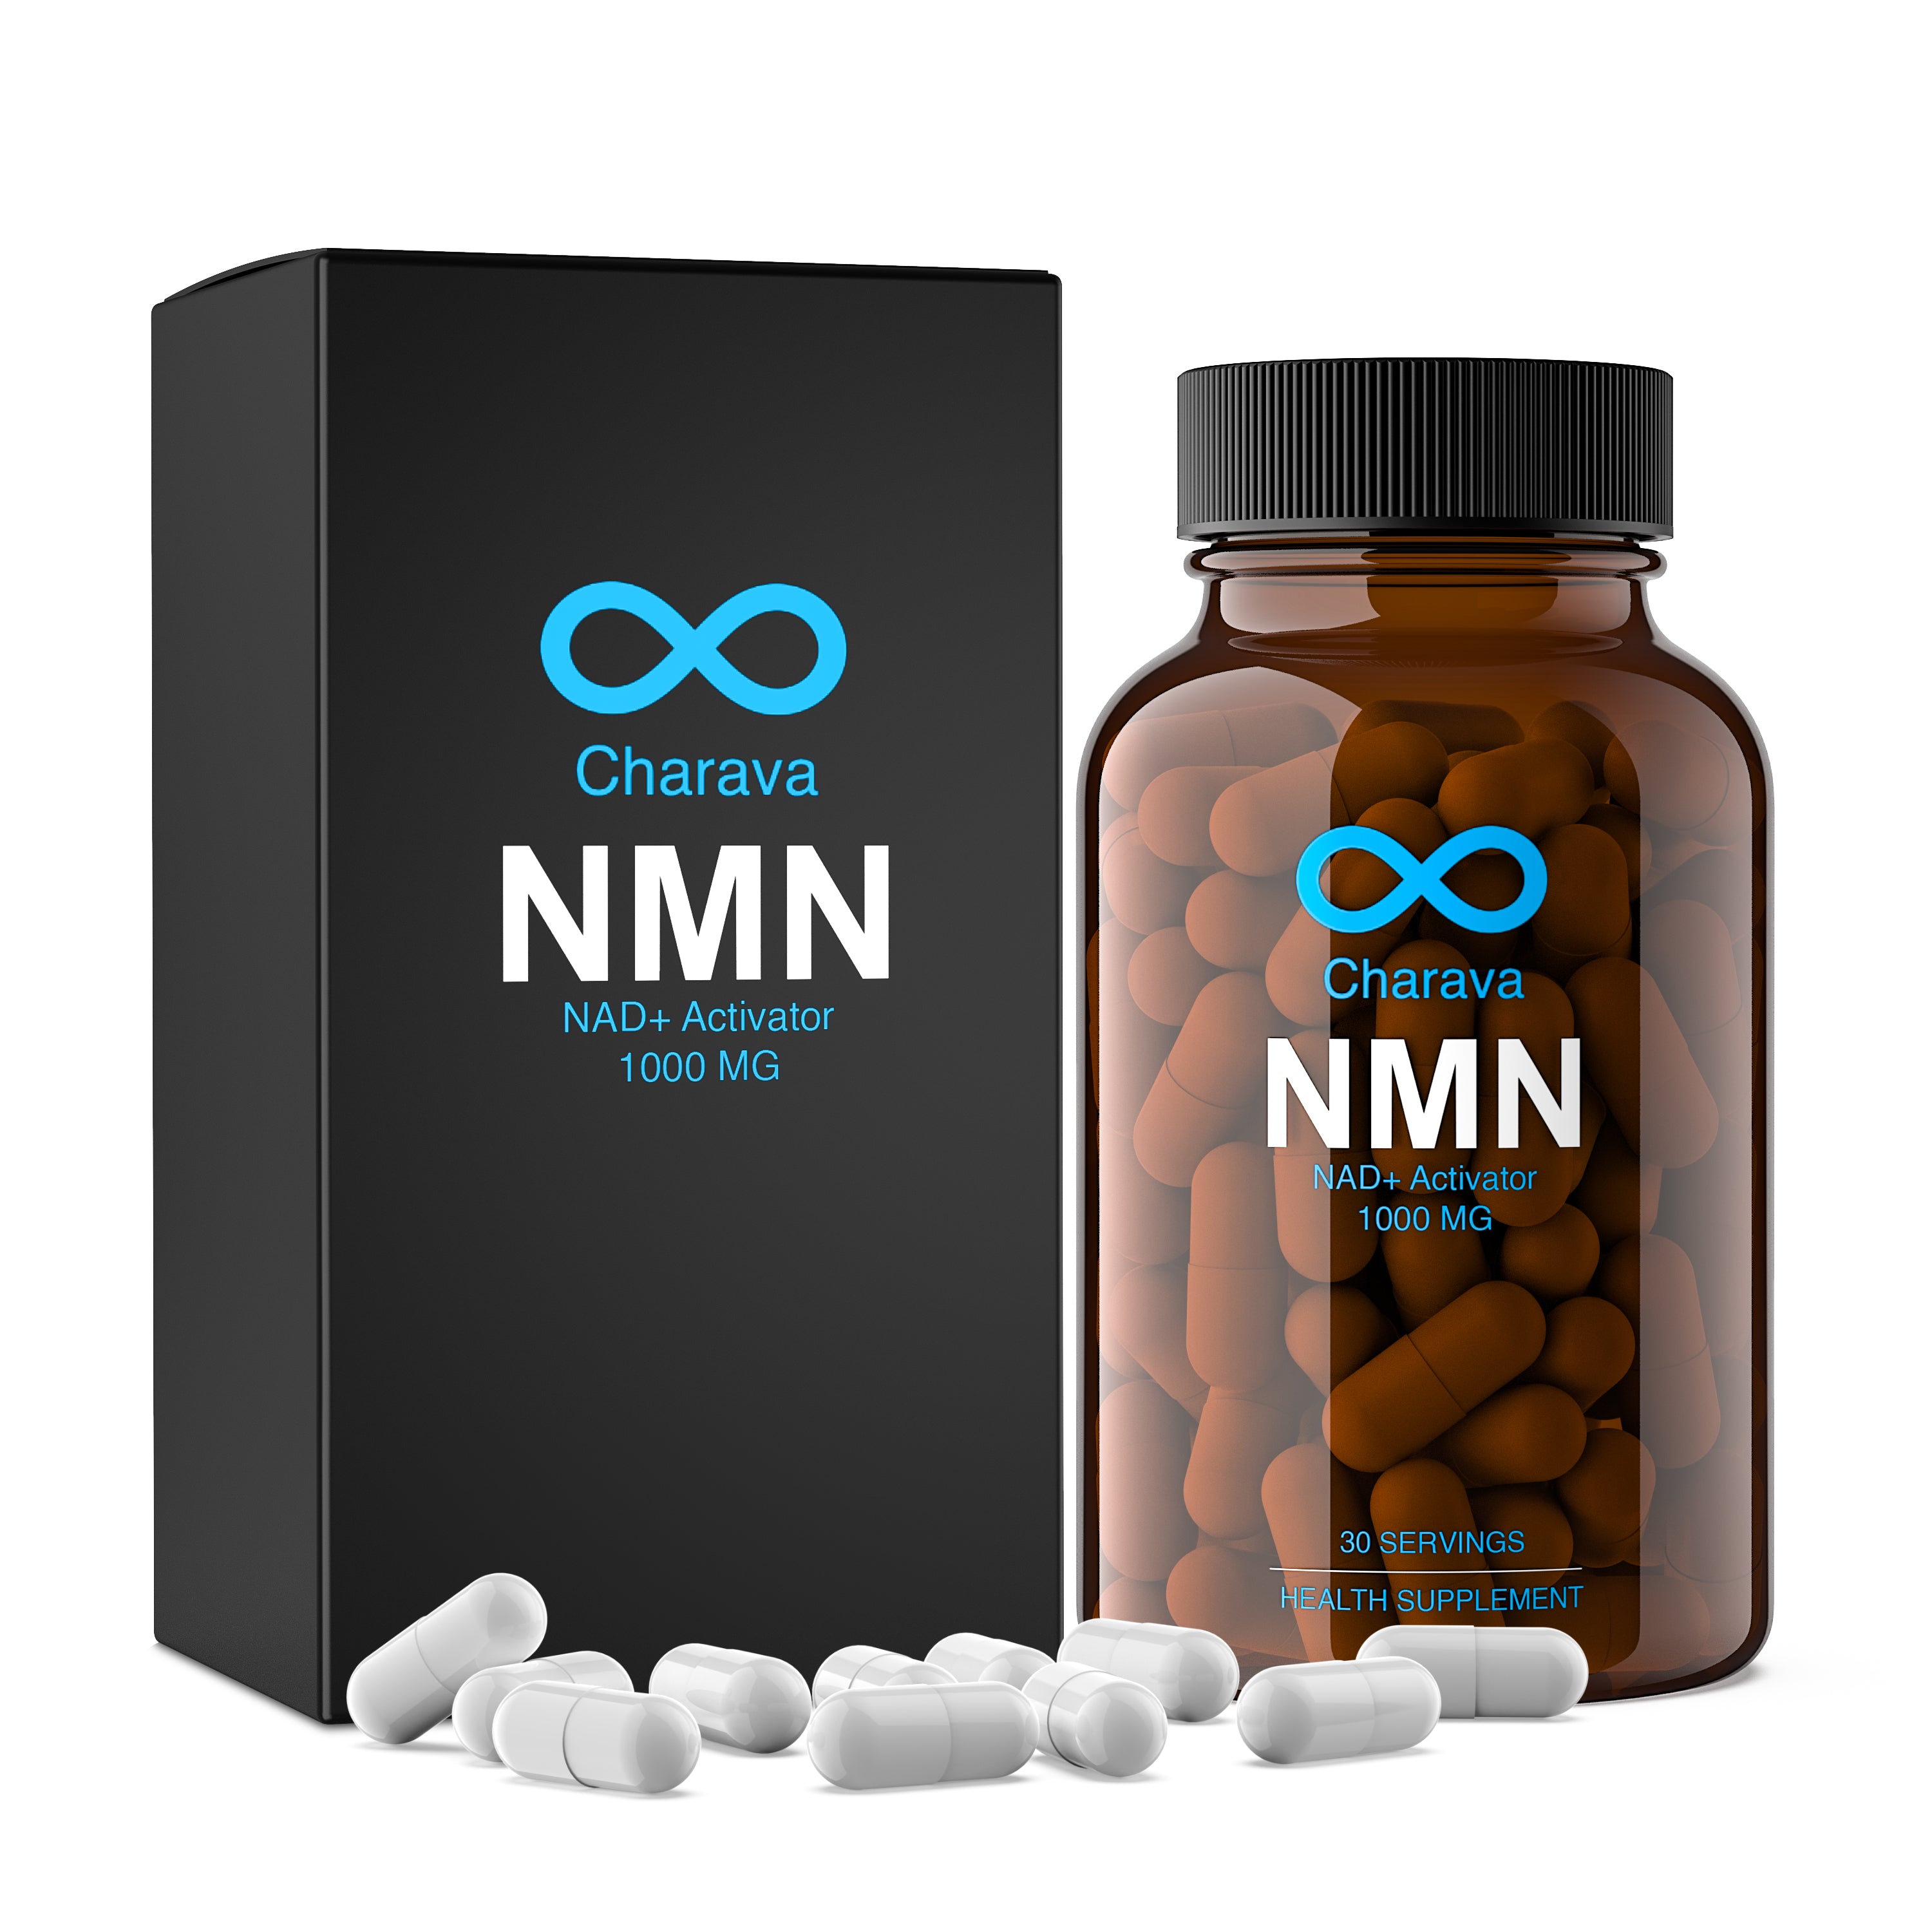 Charava NMN 1000mg - NMN Supplements South Africa - Nicotinamide Mononucleotide